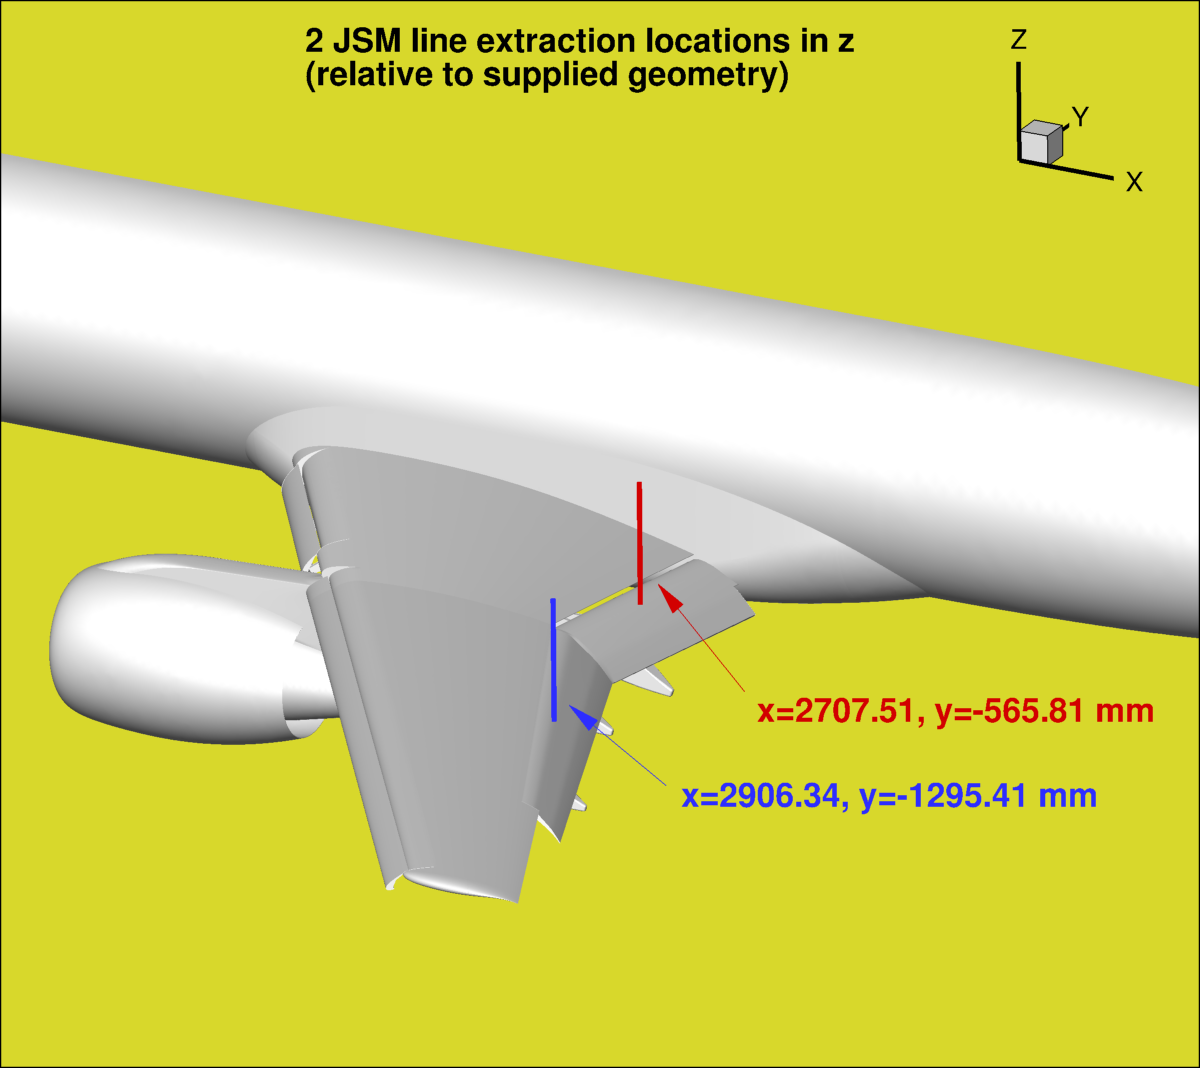 Velocity extraction locations for JSM